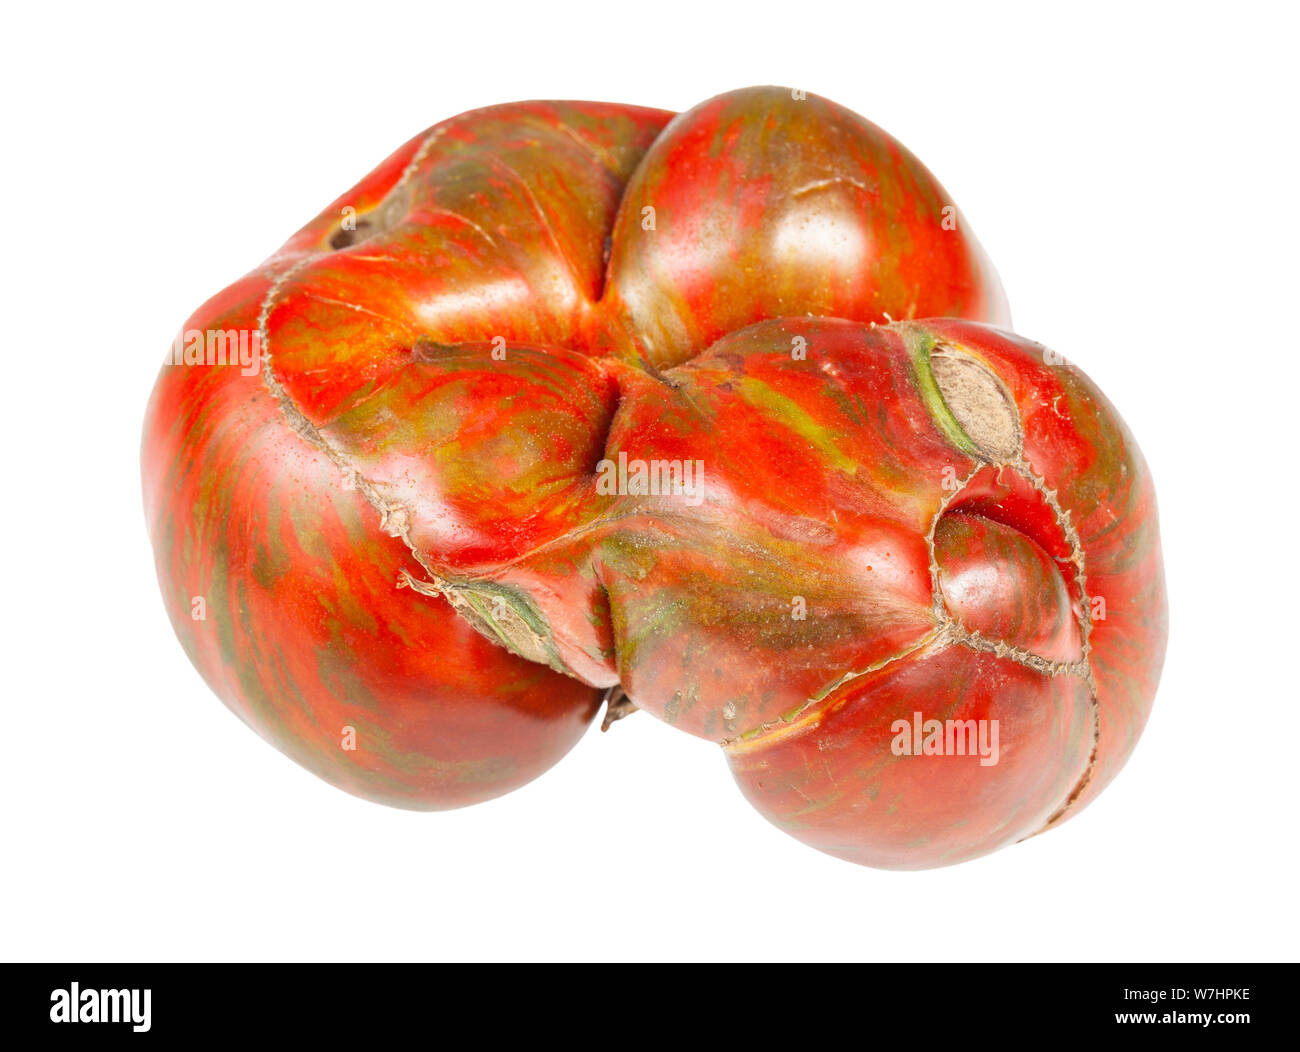 organic large tomato with green veins isolated on white background Stock Photo